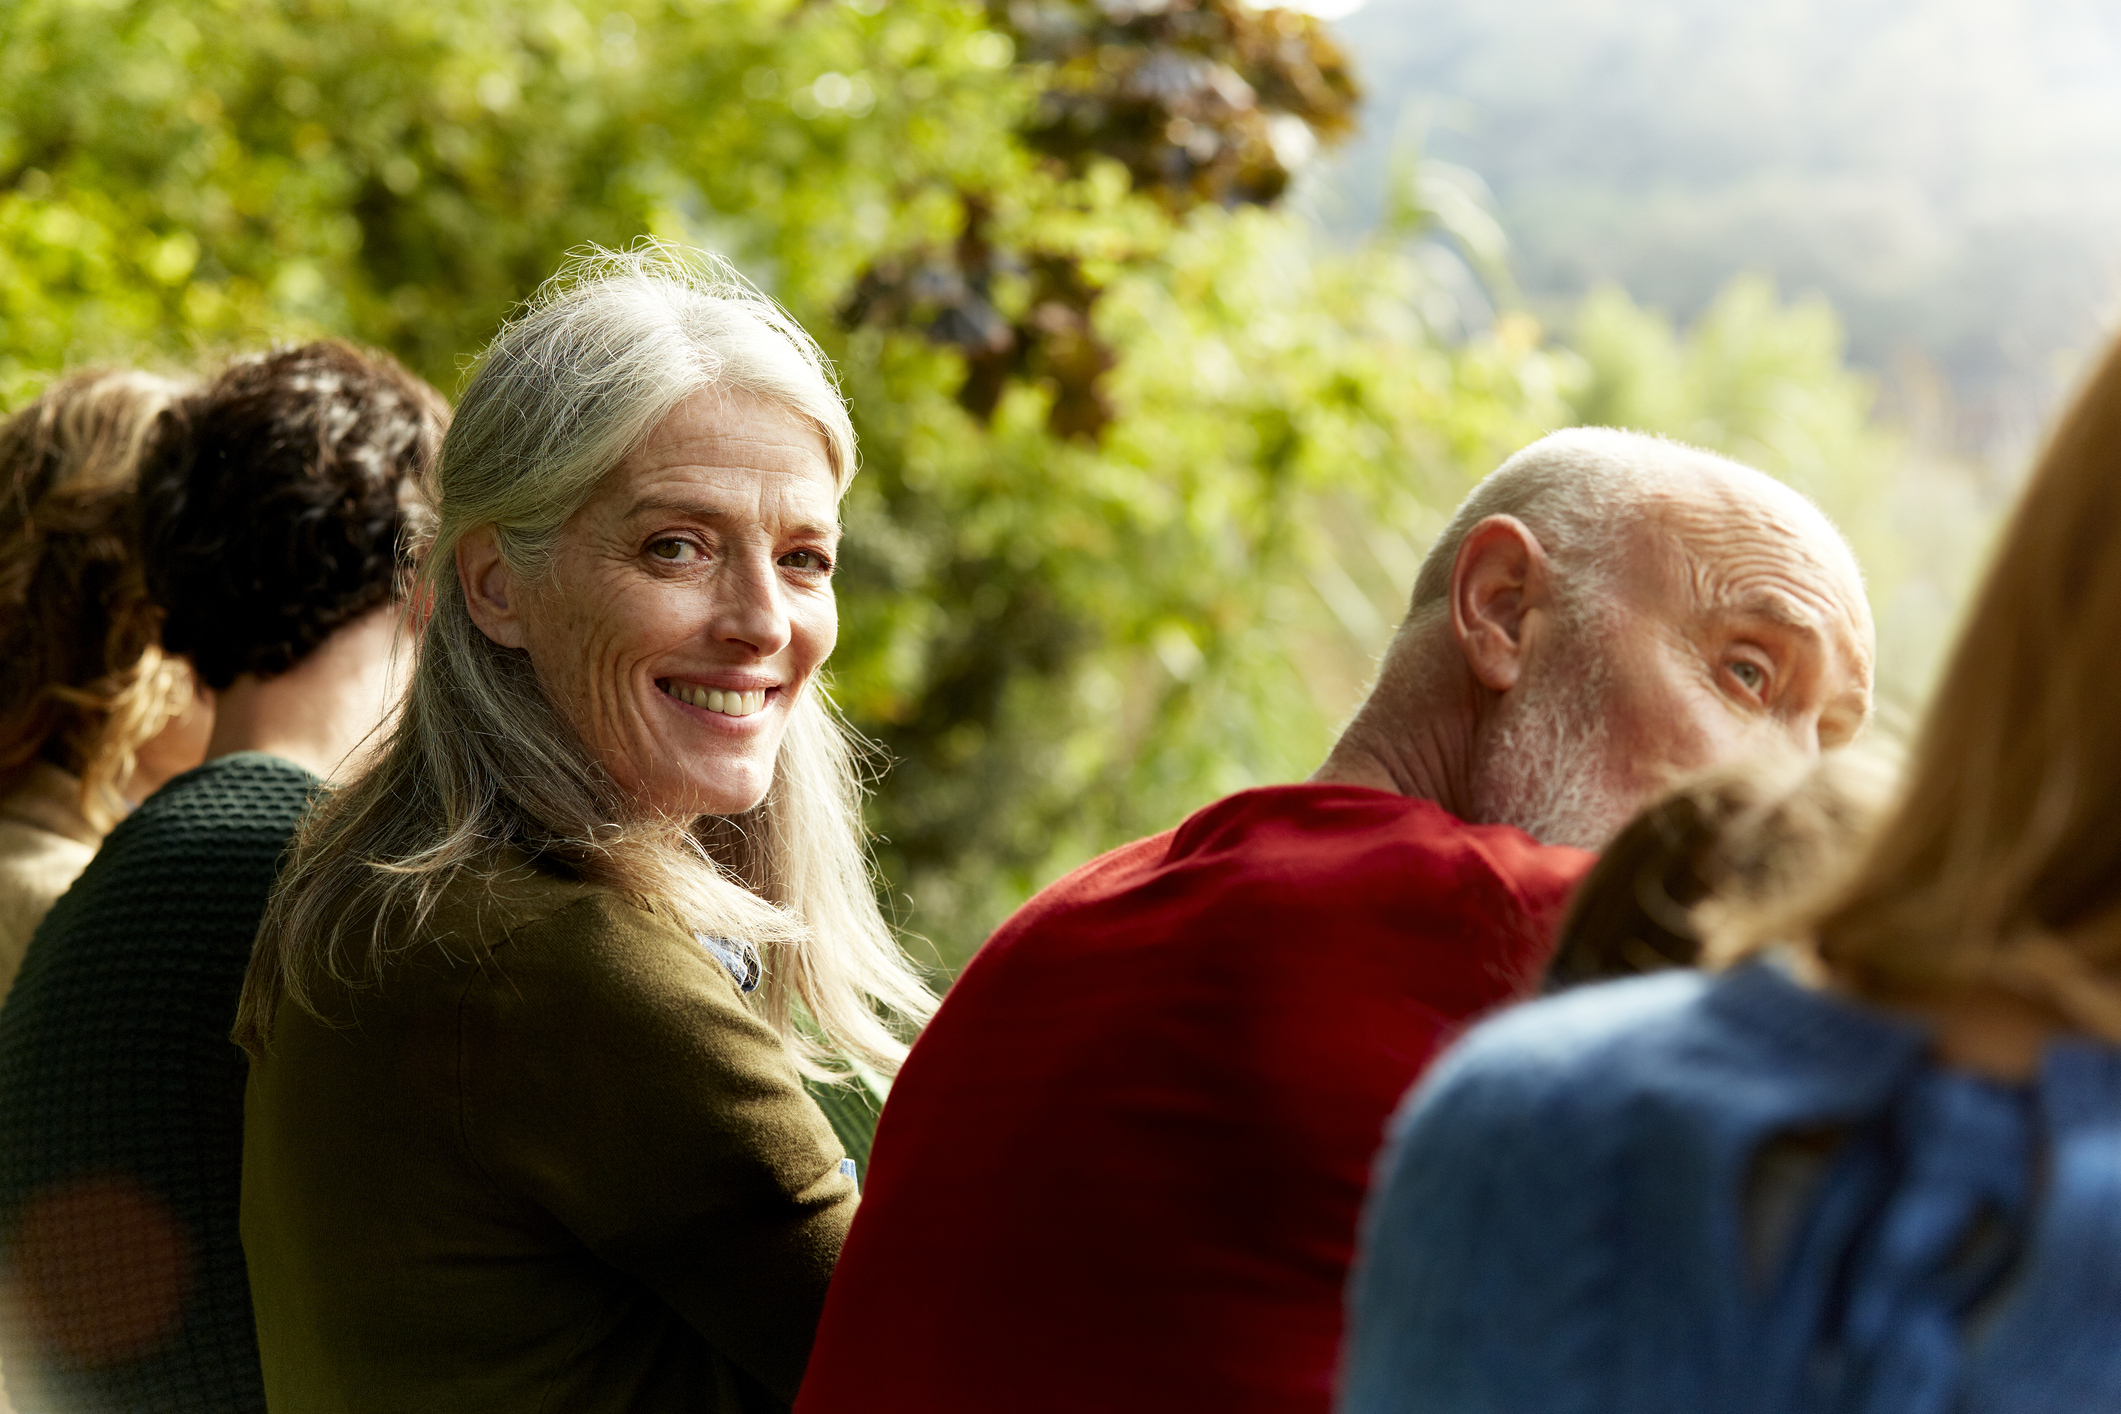 Two older adults smiling at each other with others in the foreground, outdoors